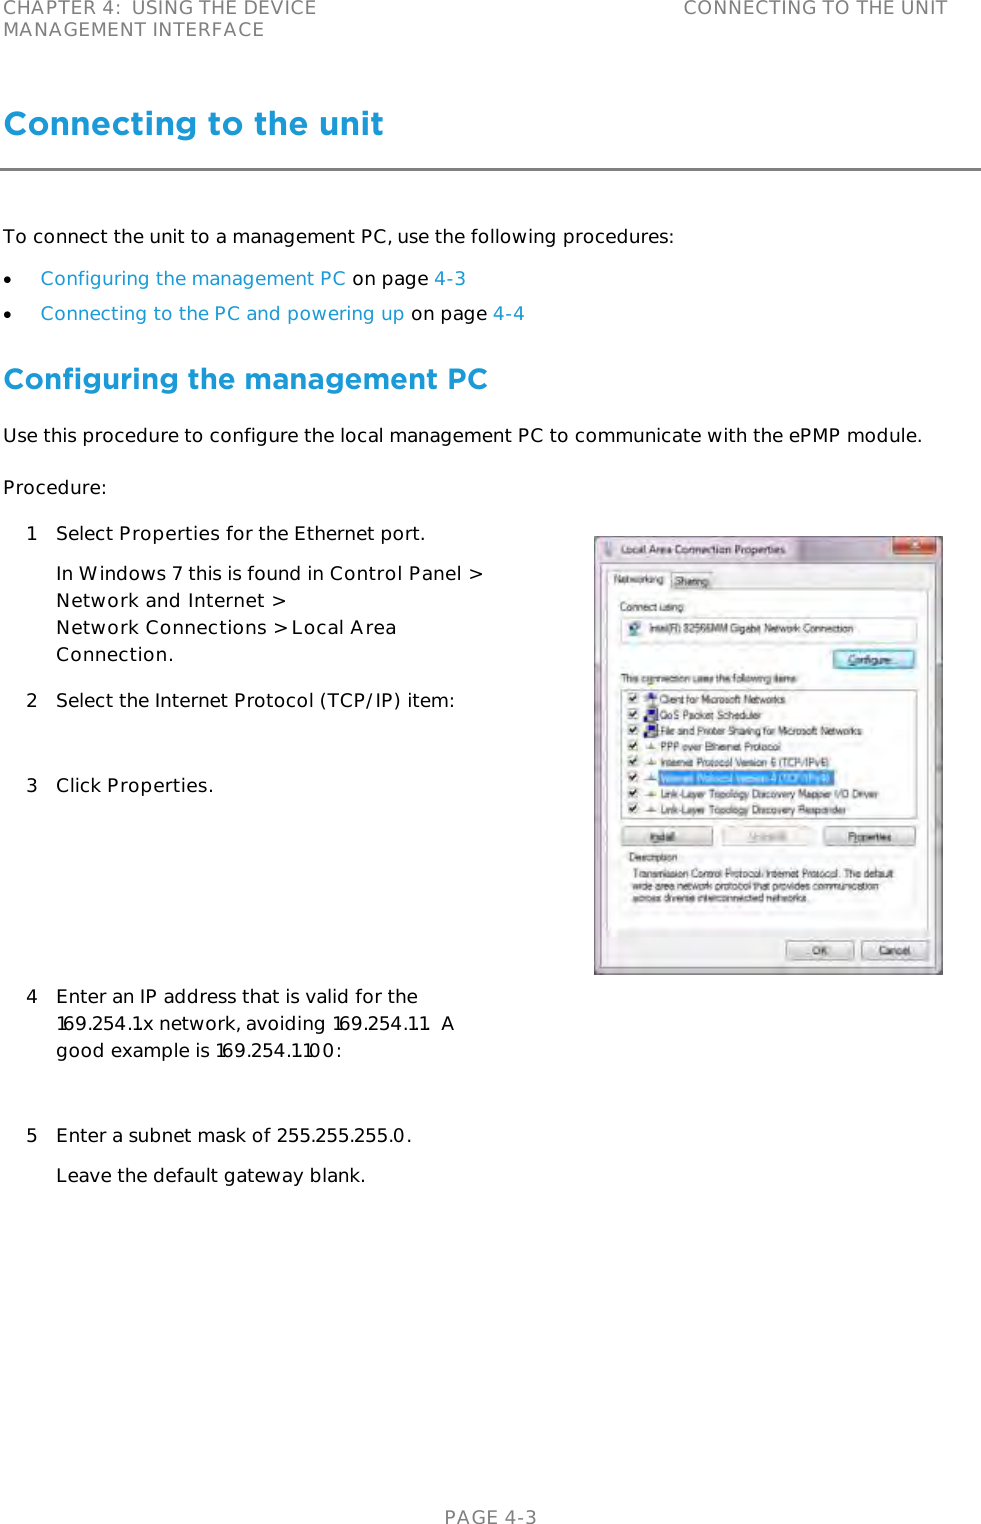 CHAPTER 4:  USING THE DEVICE MANAGEMENT INTERFACE CONNECTING TO THE UNIT   PAGE 4-3 Connecting to the unit To connect the unit to a management PC, use the following procedures:  Configuring the management PC on page 4-3  Connecting to the PC and powering up on page 4-4 Configuring the management PC Use this procedure to configure the local management PC to communicate with the ePMP module. Procedure: 1 Select Properties for the Ethernet port. In Windows 7 this is found in Control Panel &gt; Network and Internet &gt;  Network Connections &gt; Local Area Connection.  2 Select the Internet Protocol (TCP/IP) item:  3 Click Properties. 4 Enter an IP address that is valid for the 169.254.1.x network, avoiding 169.254.1.1.  A good example is 169.254.1.100:  5 Enter a subnet mask of 255.255.255.0. Leave the default gateway blank. 